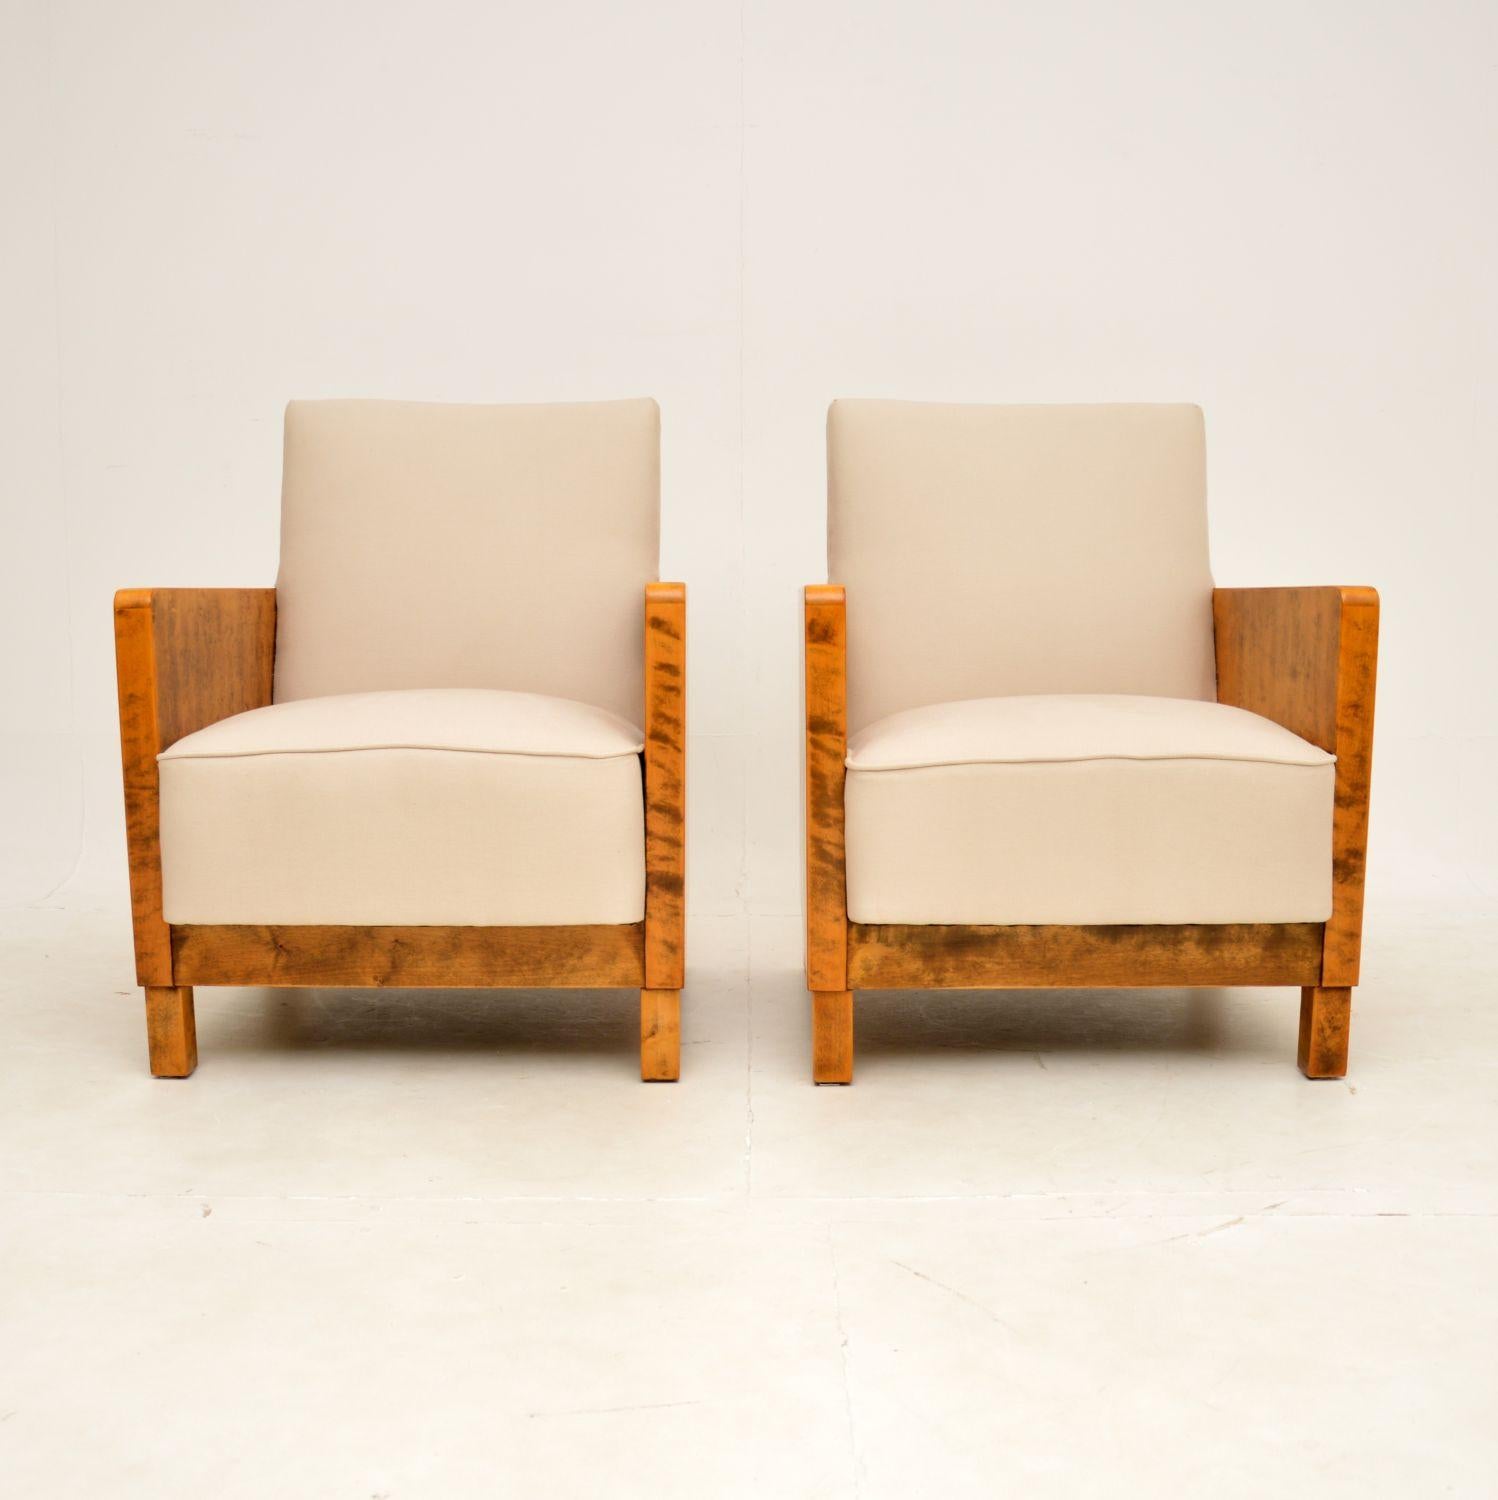 A stunning and extremely rare pair of Swedish Art Deco armchairs, designed by Axel Larsson. They were recently imported from Sweden, and they date from the 1920-1930s.

The quality is outstanding, and they have an extremely stylish design. The